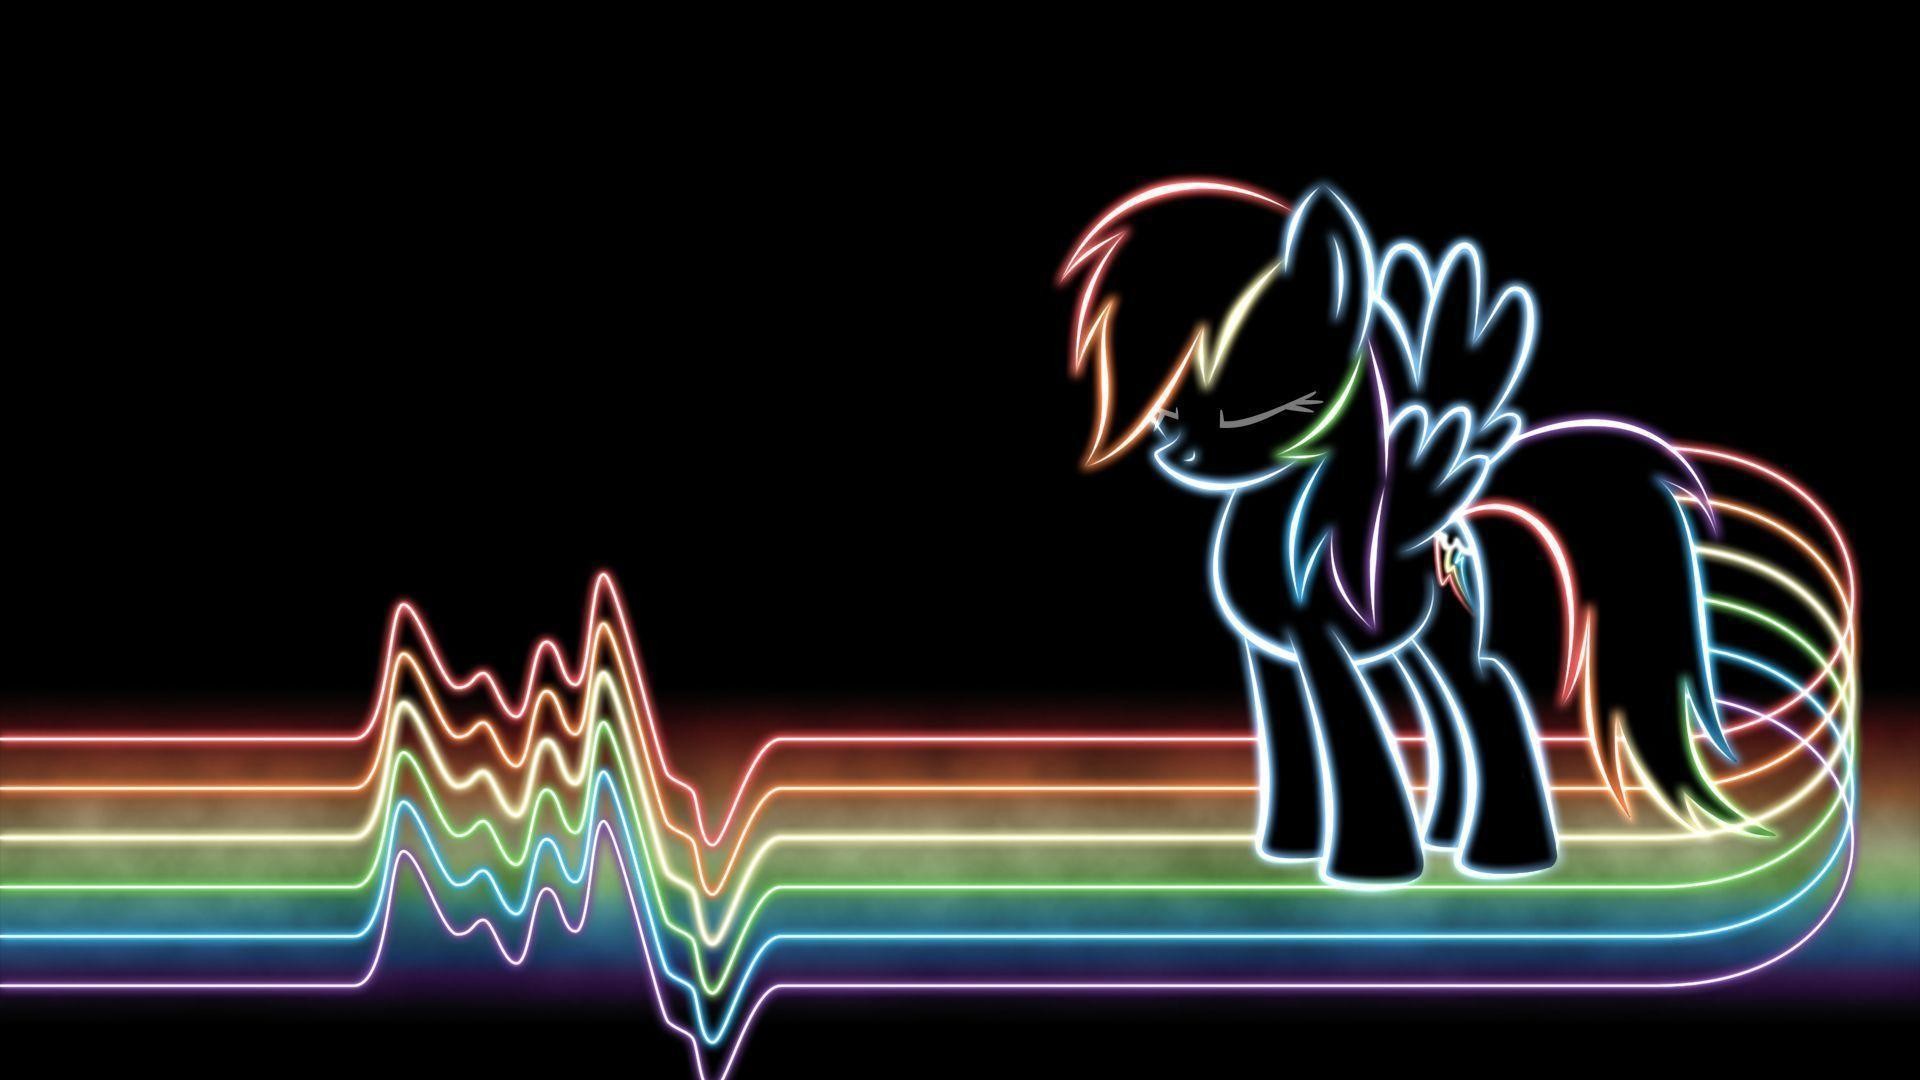 1920x1080 Mlp ps3 wallpaper - Ps3 backgrounds mlp - Mlp wallpaper for ps3 .